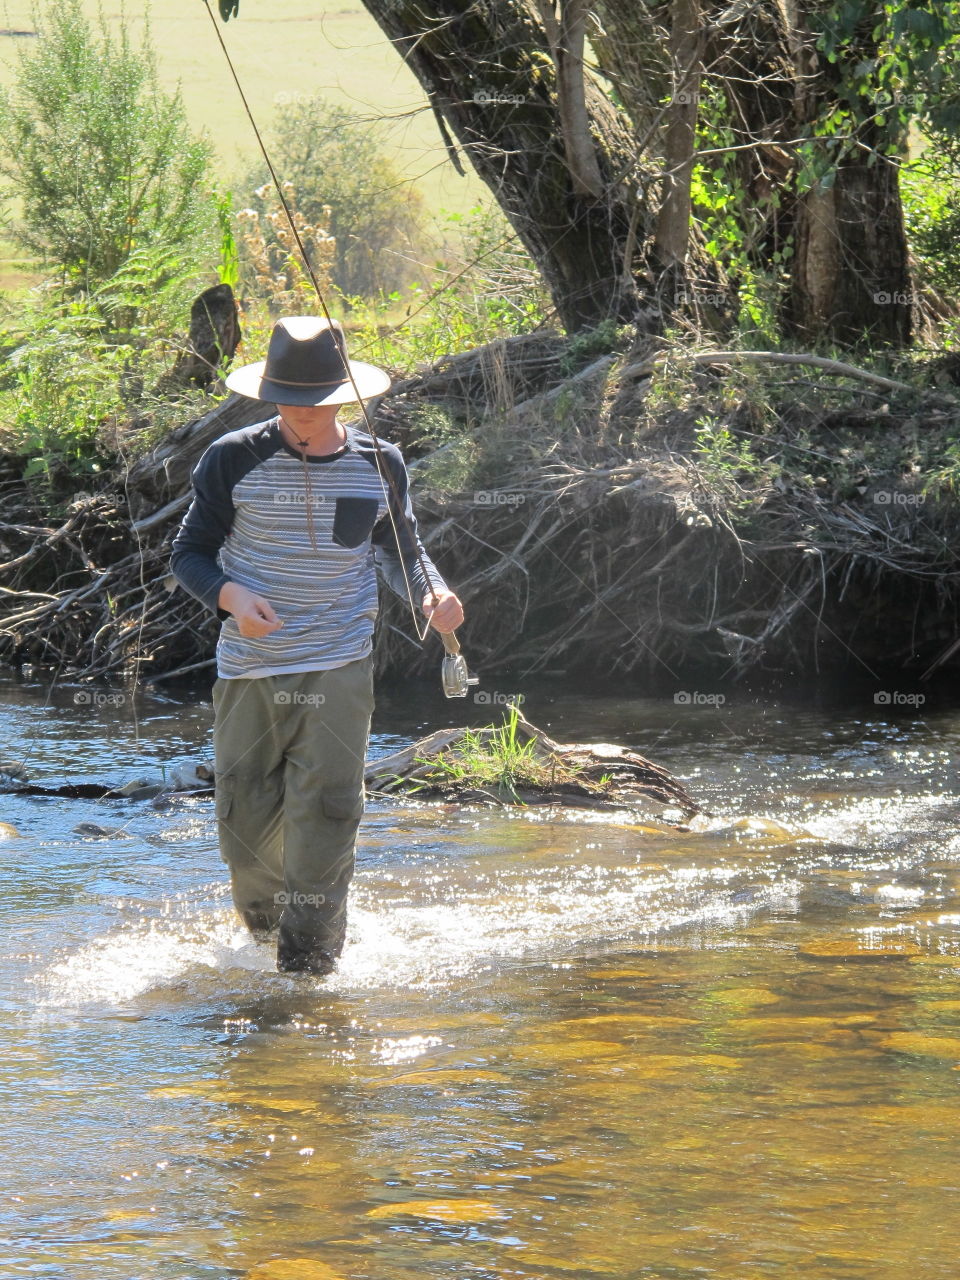 Fly fishing,  trout, Australia, river, stream, water, rod, fishing, outdoors, nature, grass, tree, 